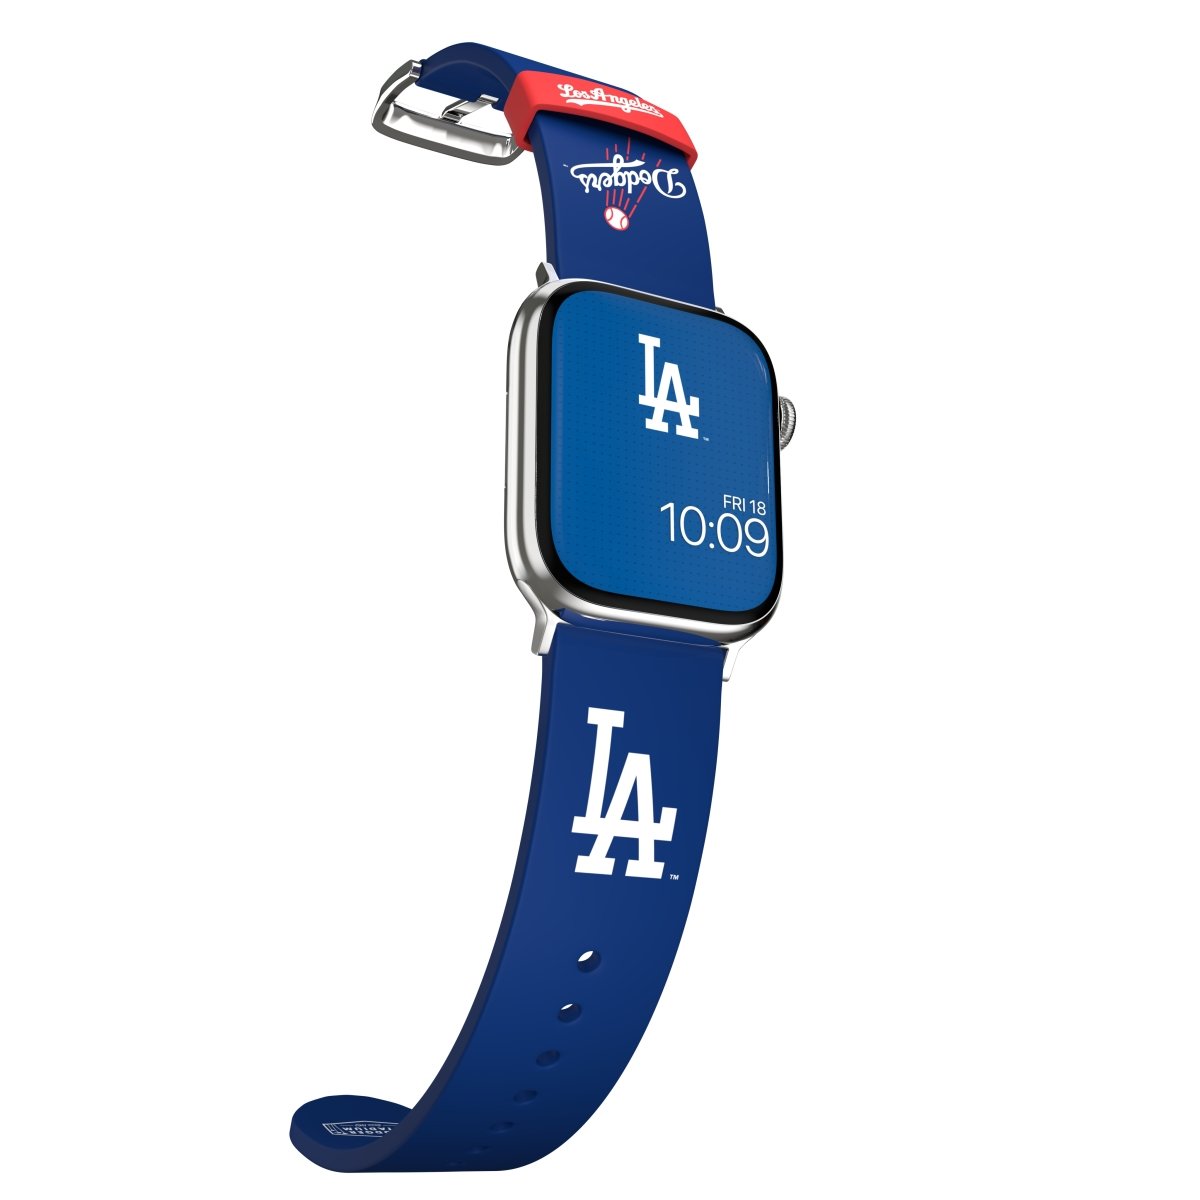 Gametime MLB Los Angeles Dodgers Black Leather Apple Watch Band (42/44mm  M/L). Watch not included. - 19445N